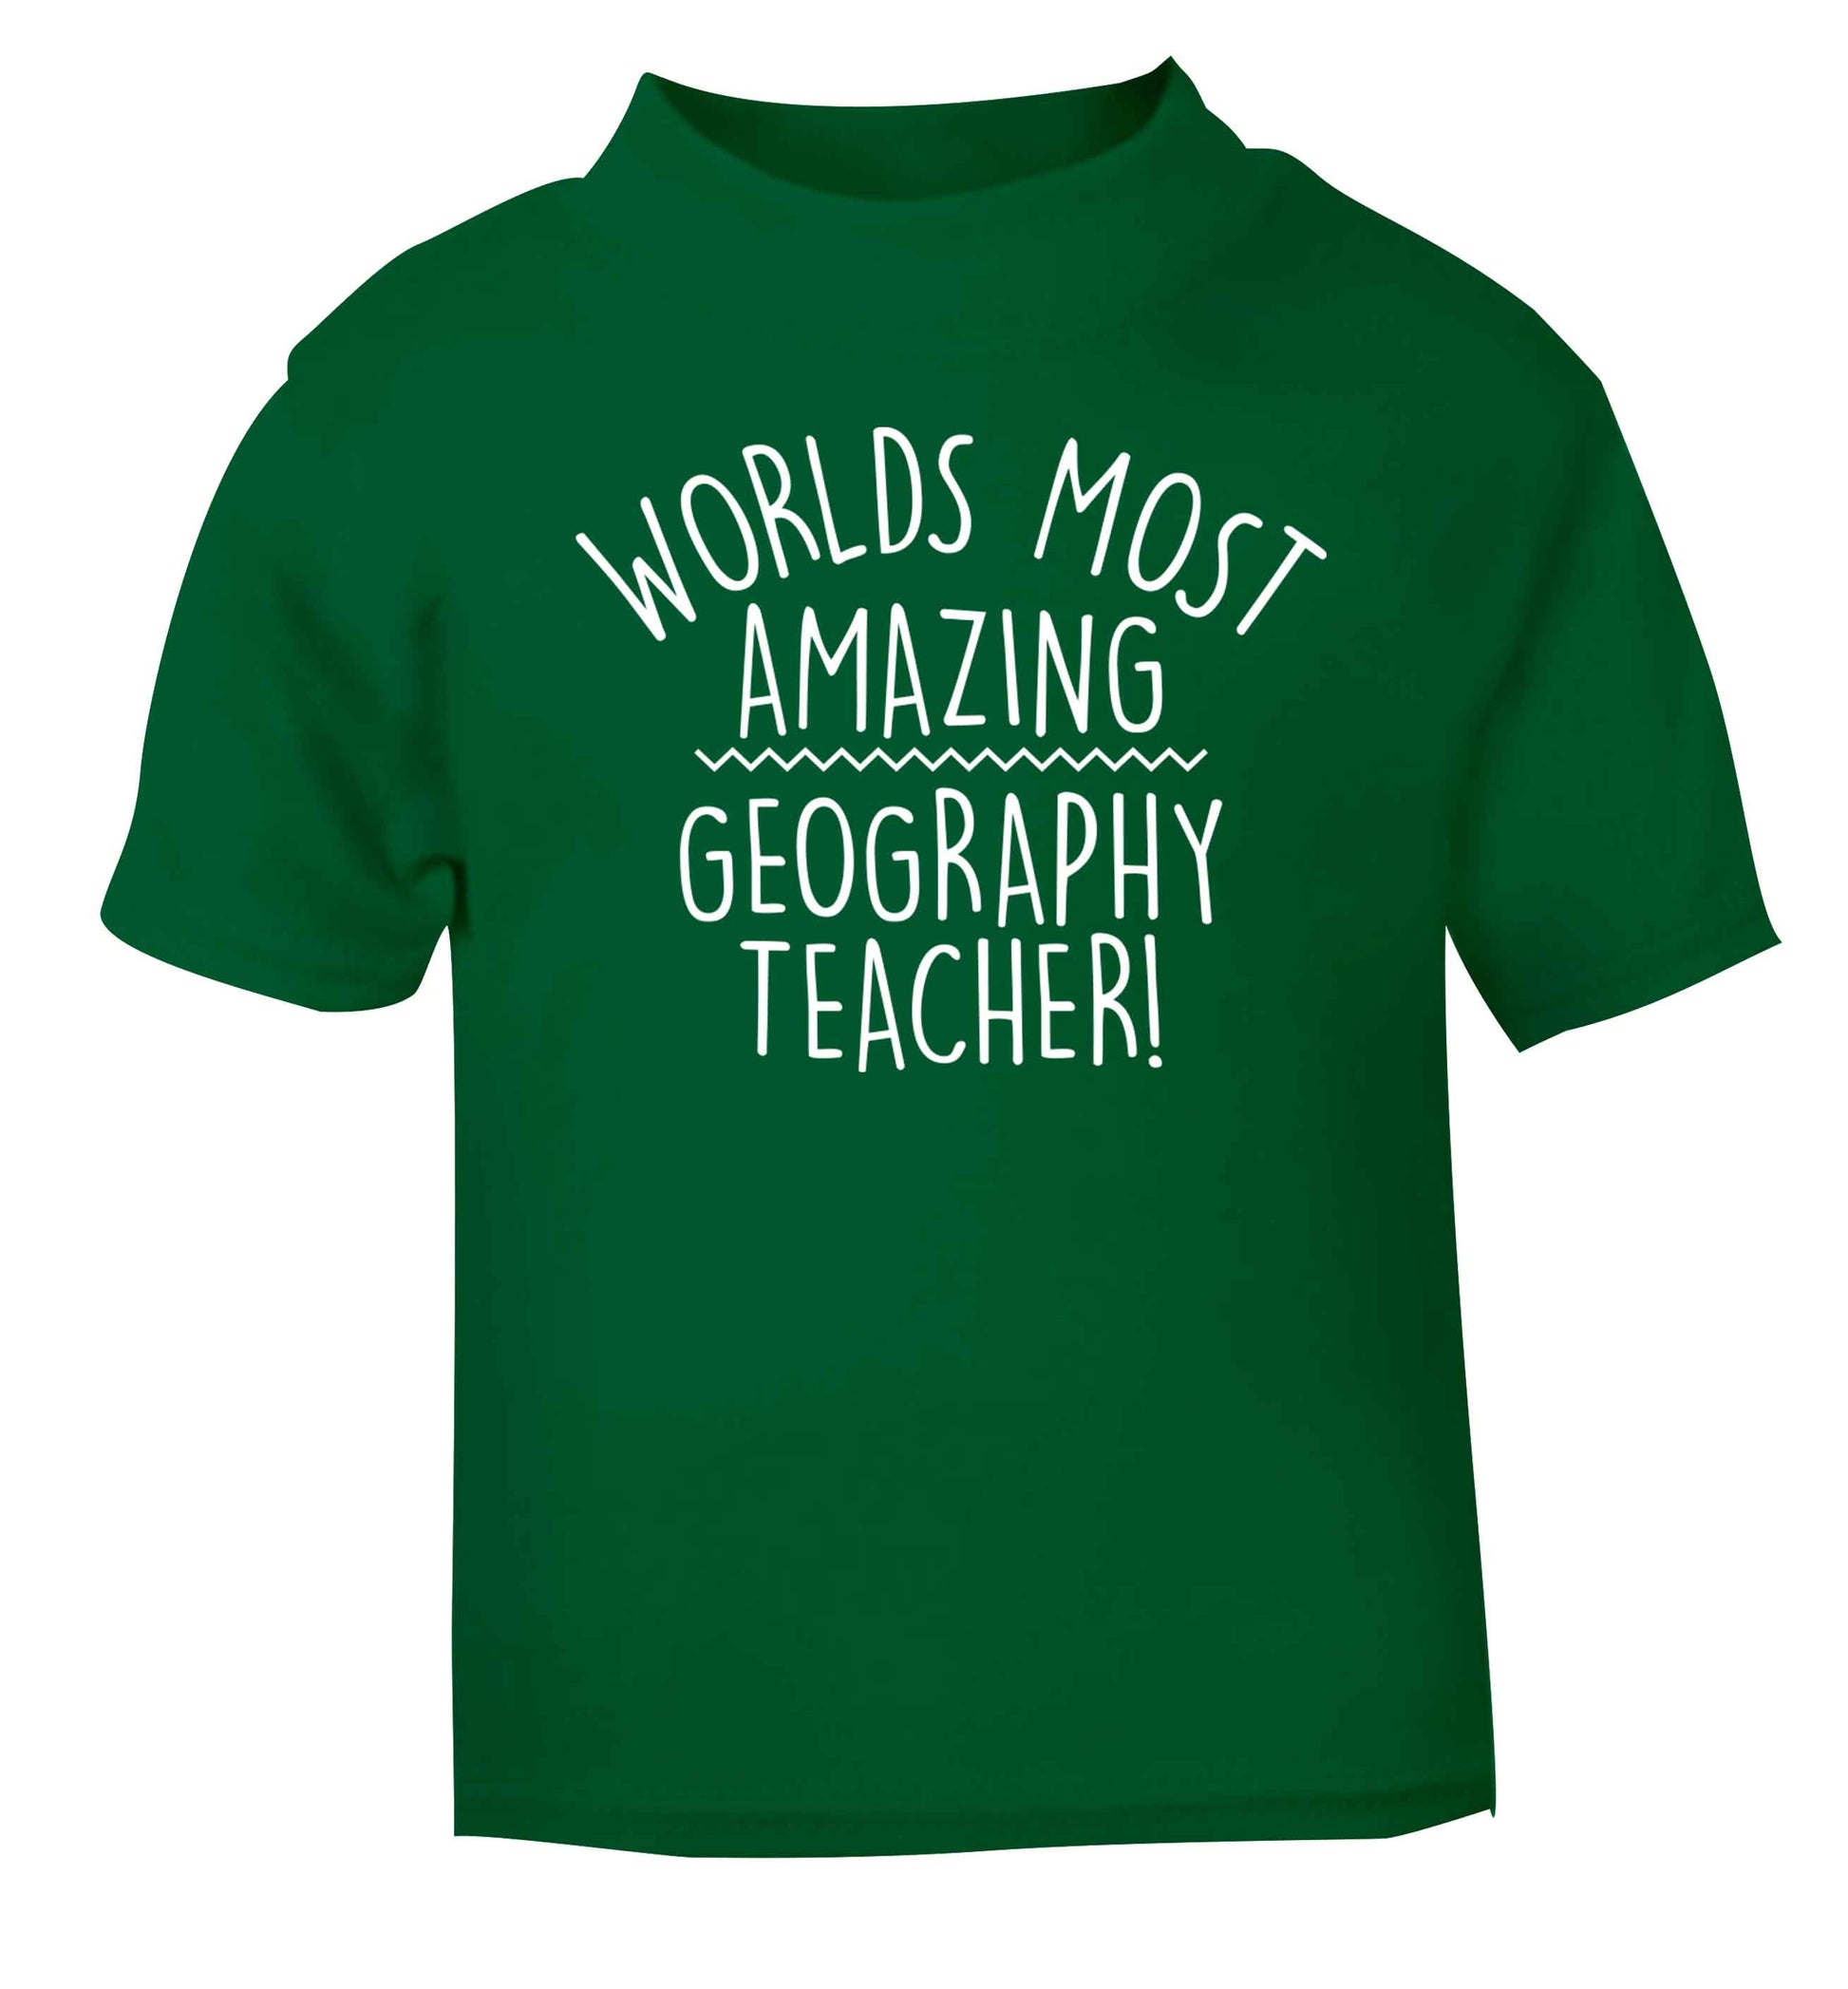 Worlds most amazing geography teacher green baby toddler Tshirt 2 Years